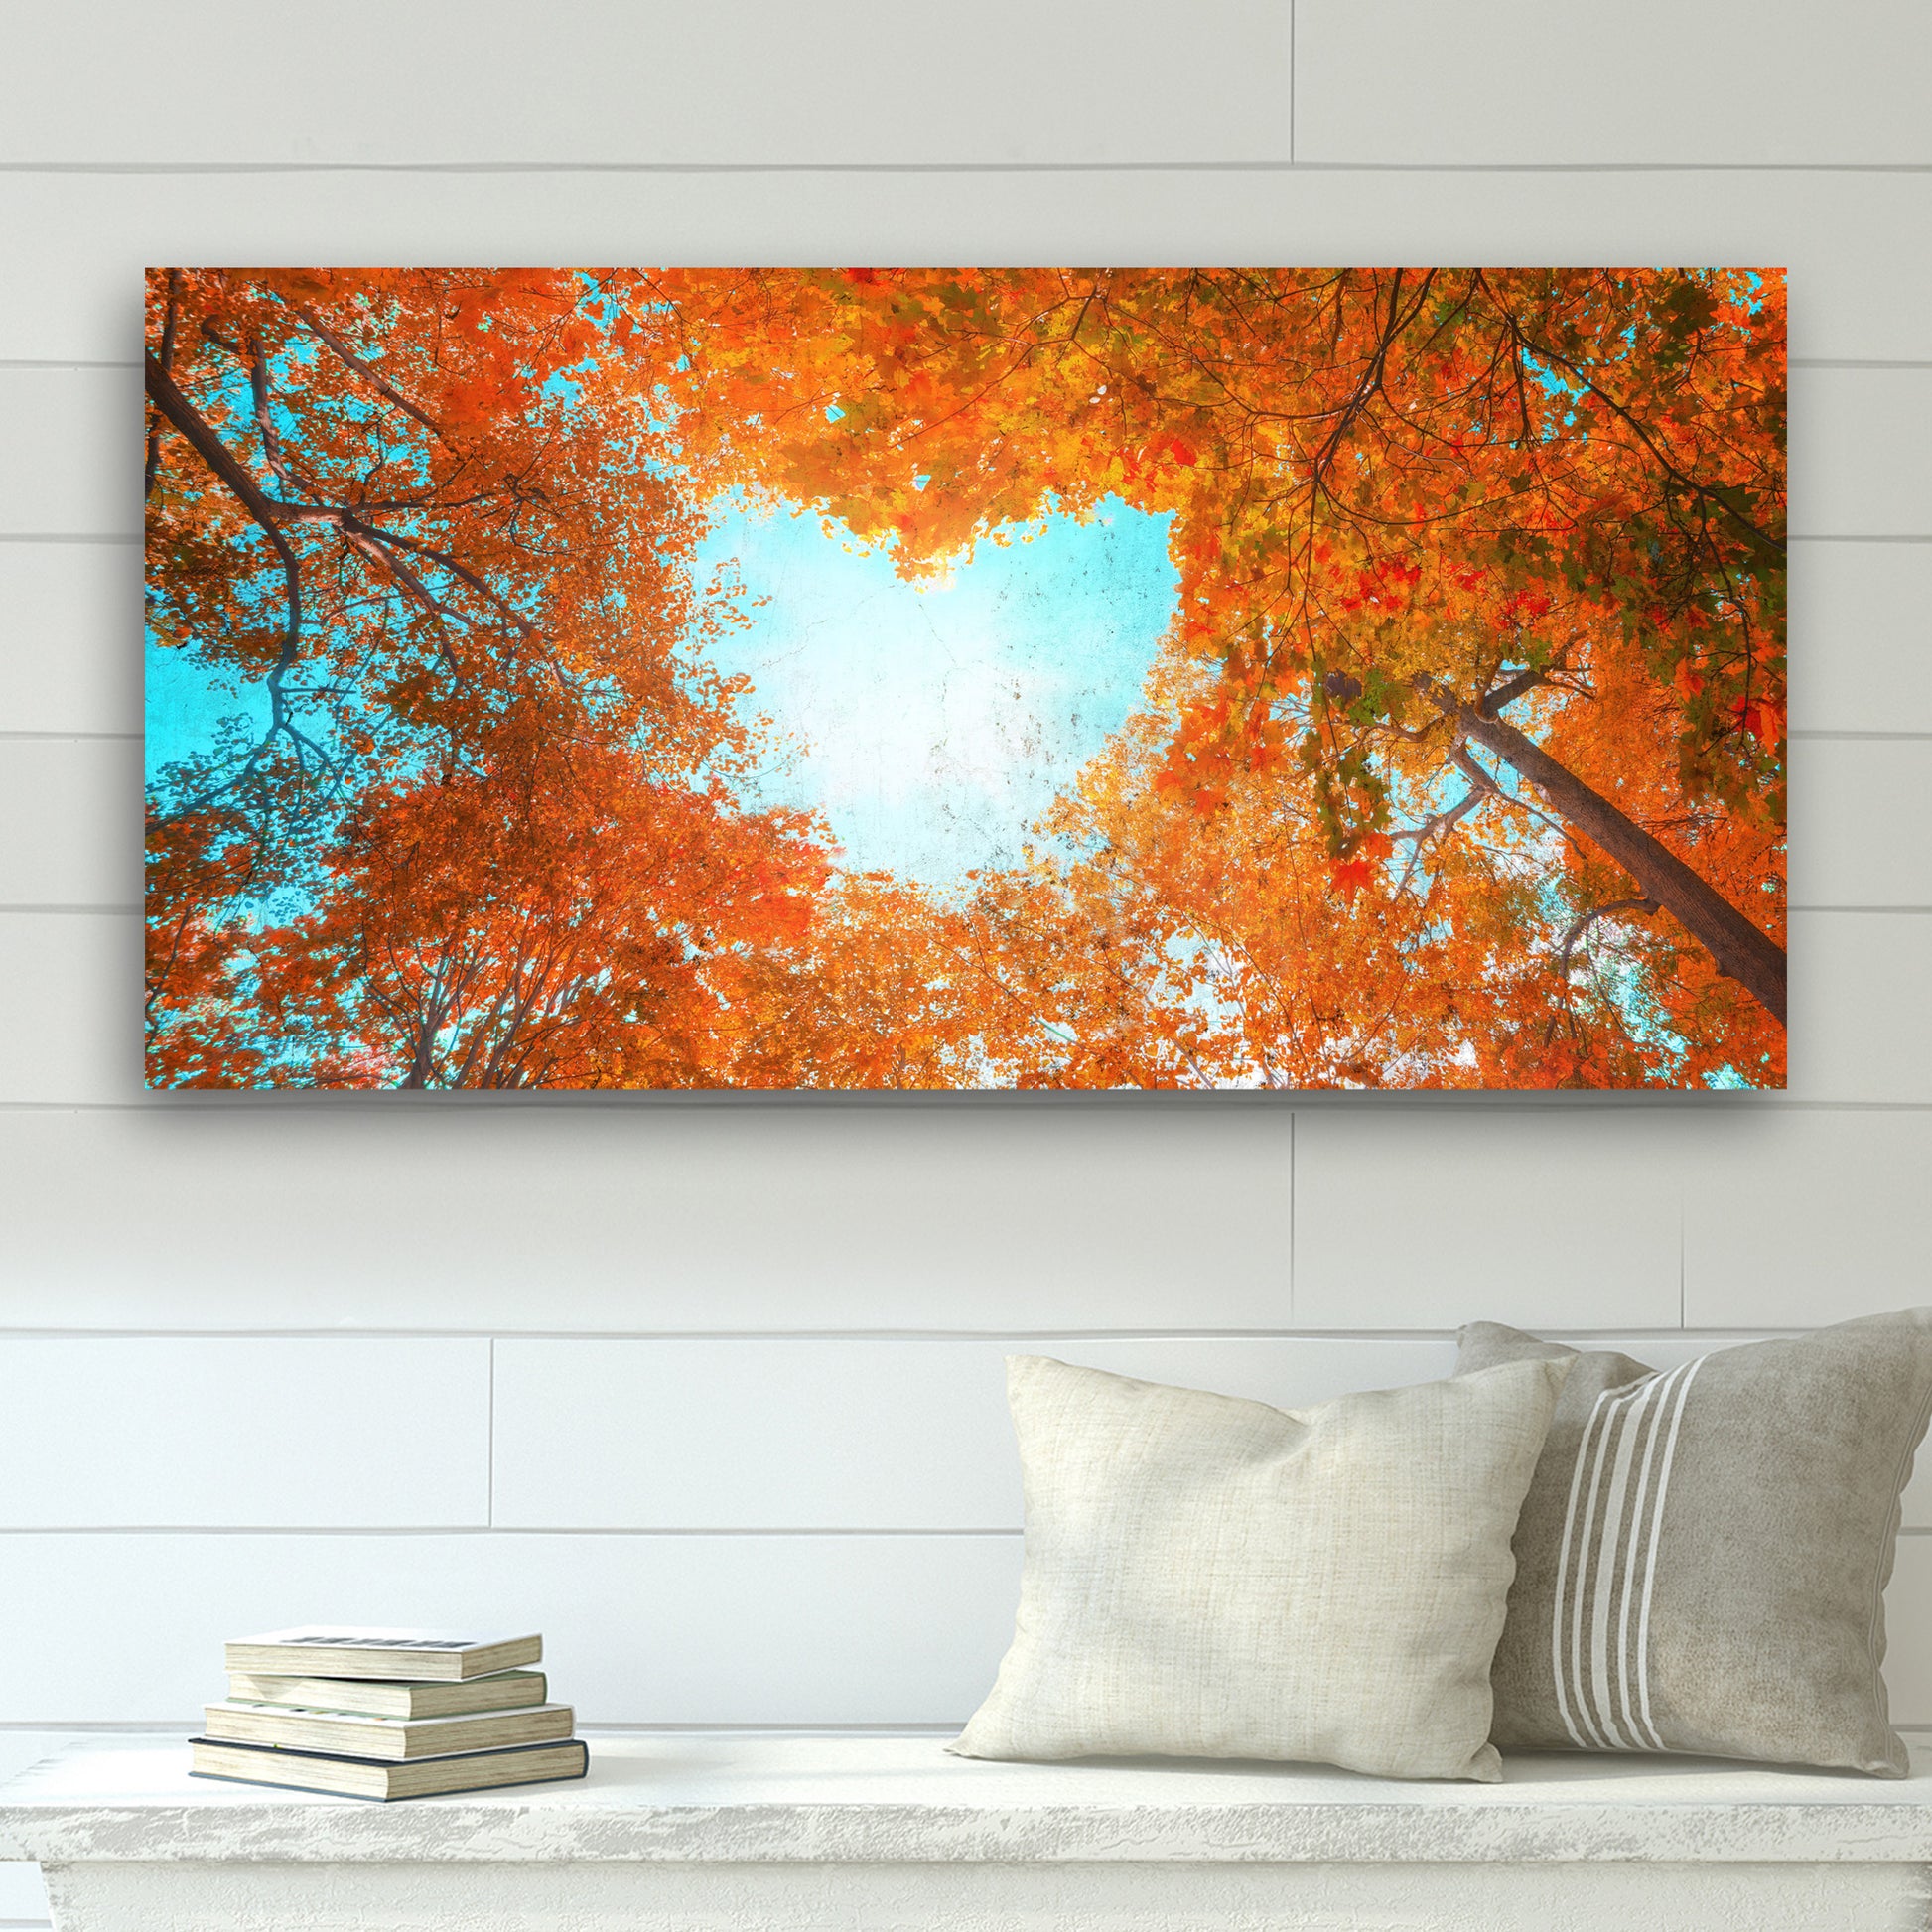 Under The Autumn Sunset Canvas Wall Art Style 1 - Image by Tailored Canvases